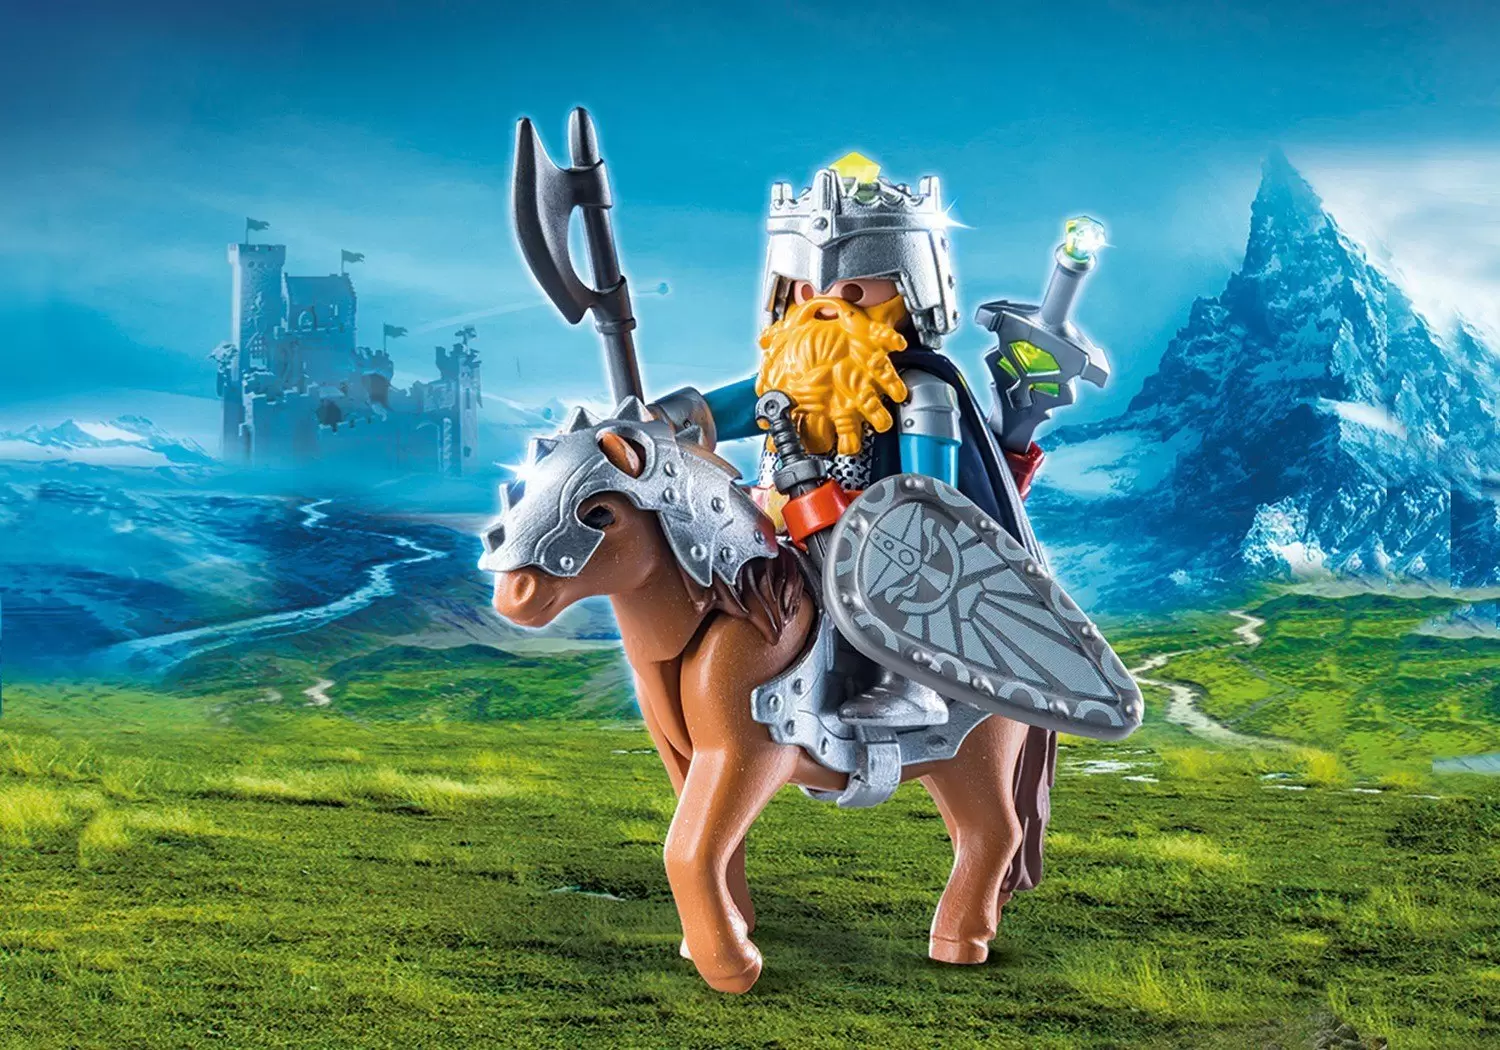 Playmobil Middle-Ages - Dwarf and Pony with Armor